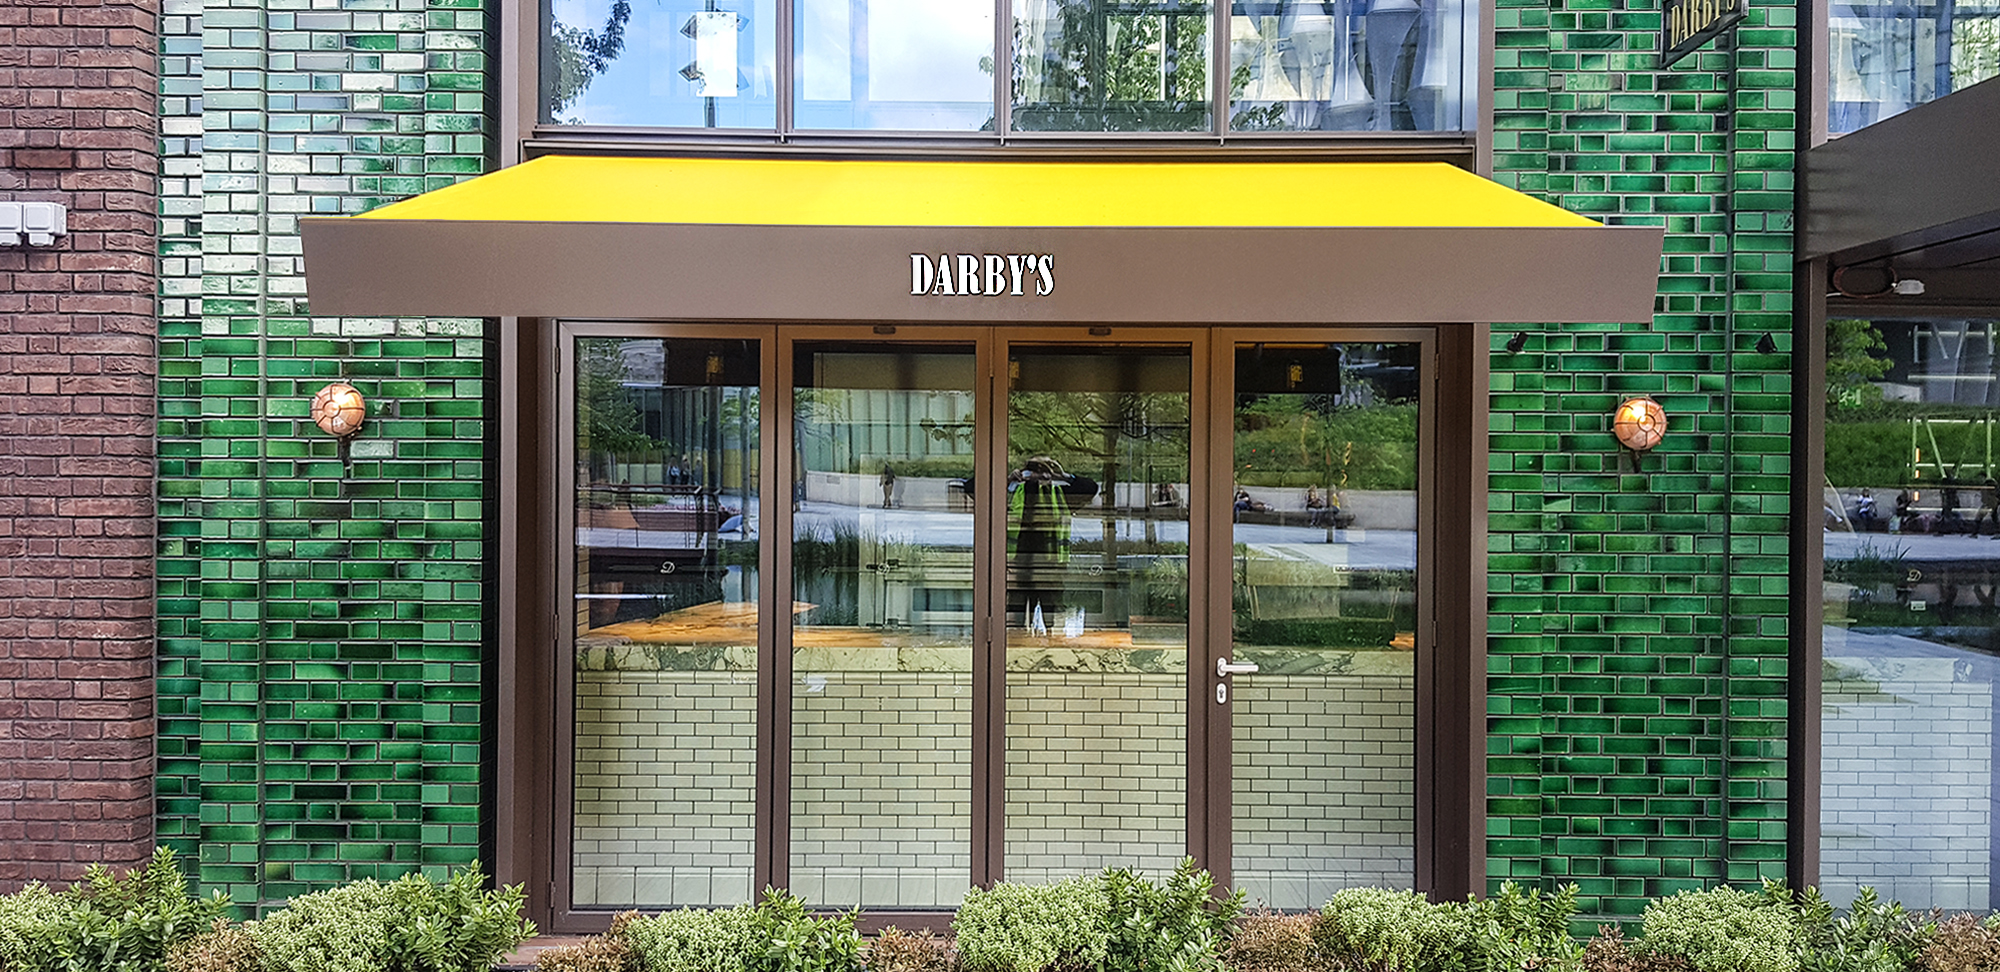 SQ2 awnings with bespoke encasement for Darby’s at Embassy Gardens, London.